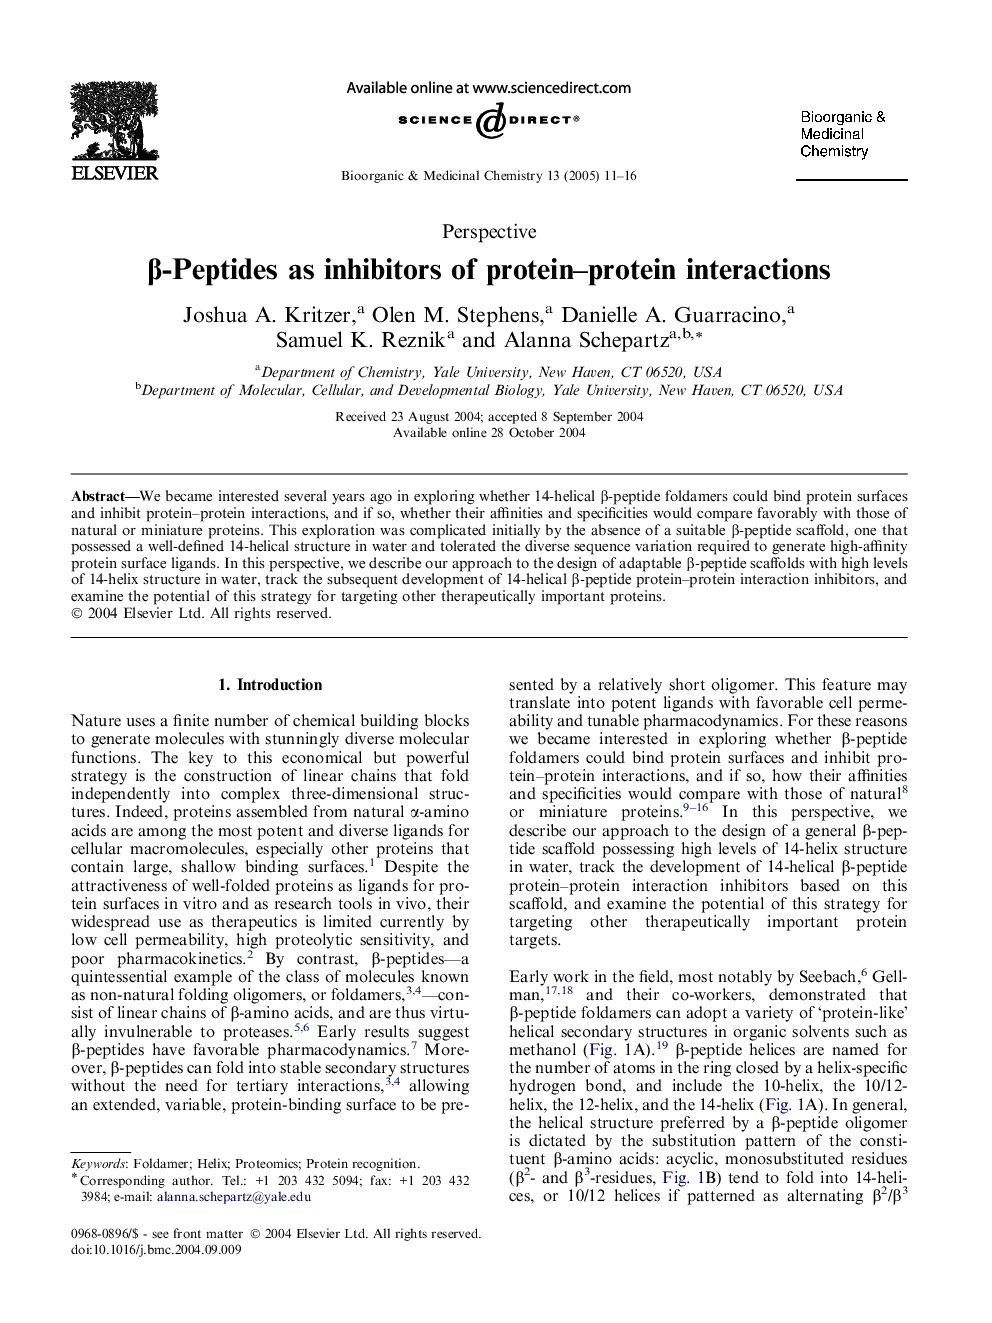 Î²-Peptides as inhibitors of protein-protein interactions